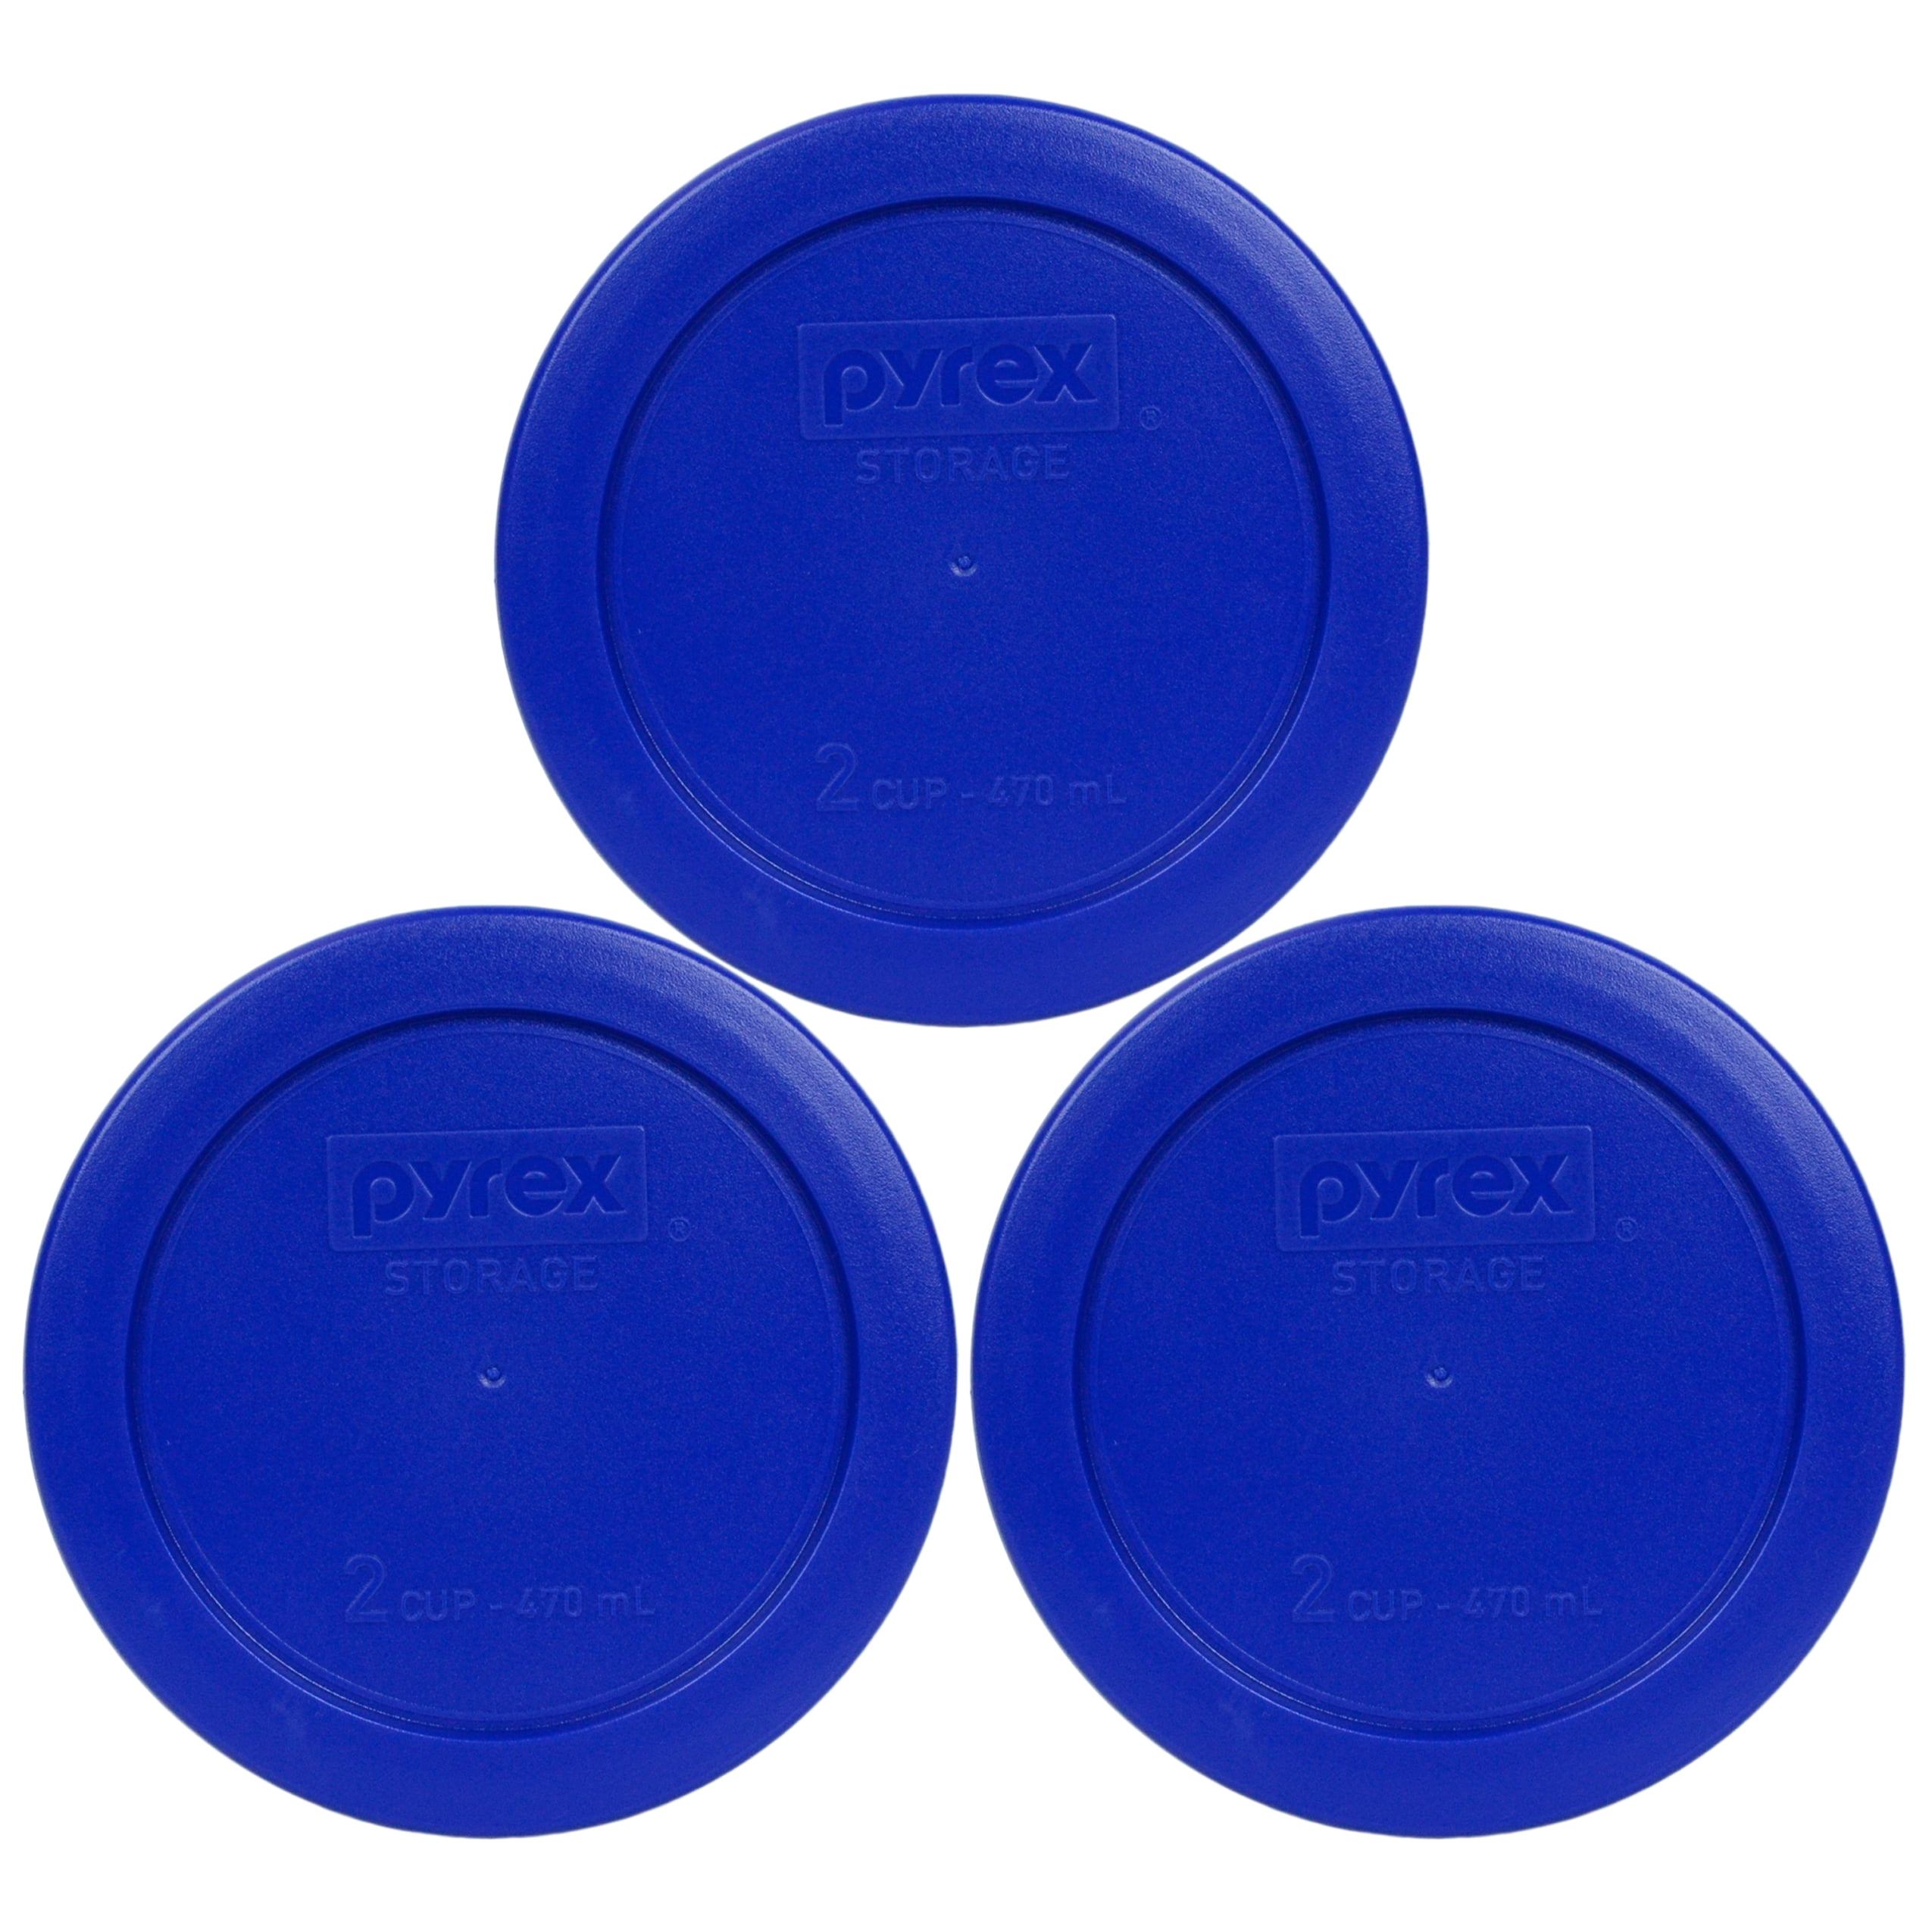 Pyrex 7200-PC Round 2 Cup 5" Storage Lid Cover 2 Pack Blue for Glass Bowl 